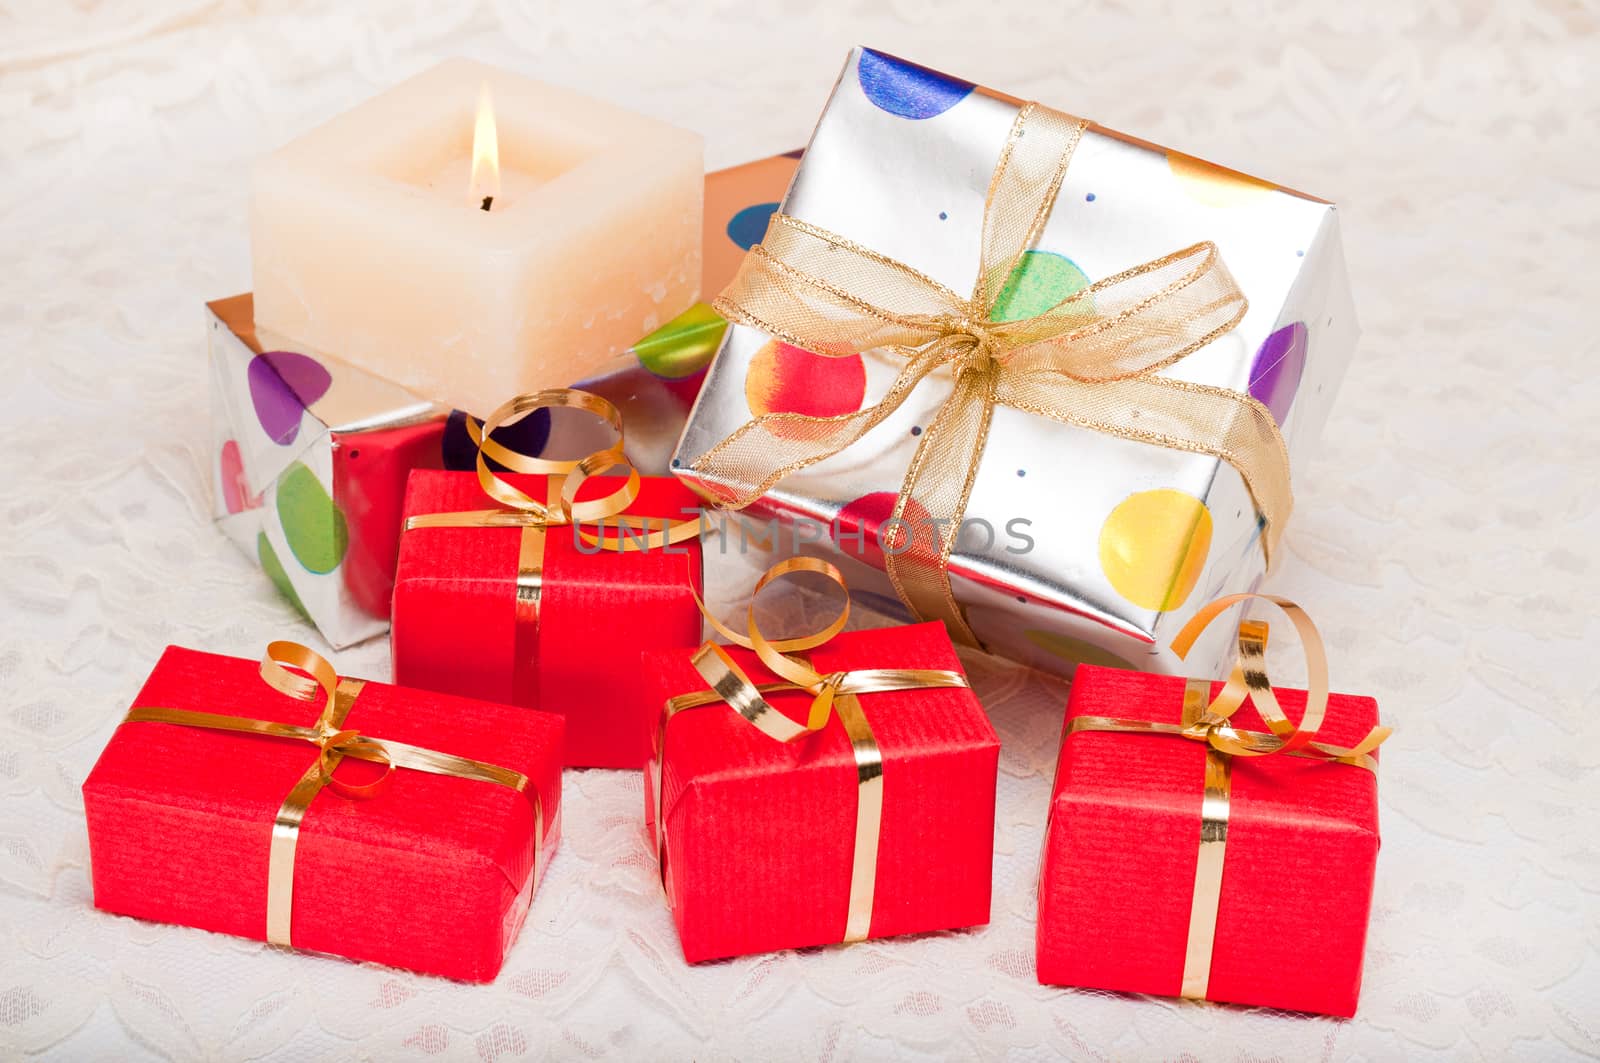 Beautiful colorful gift boxes and candle on a background of off-white lace